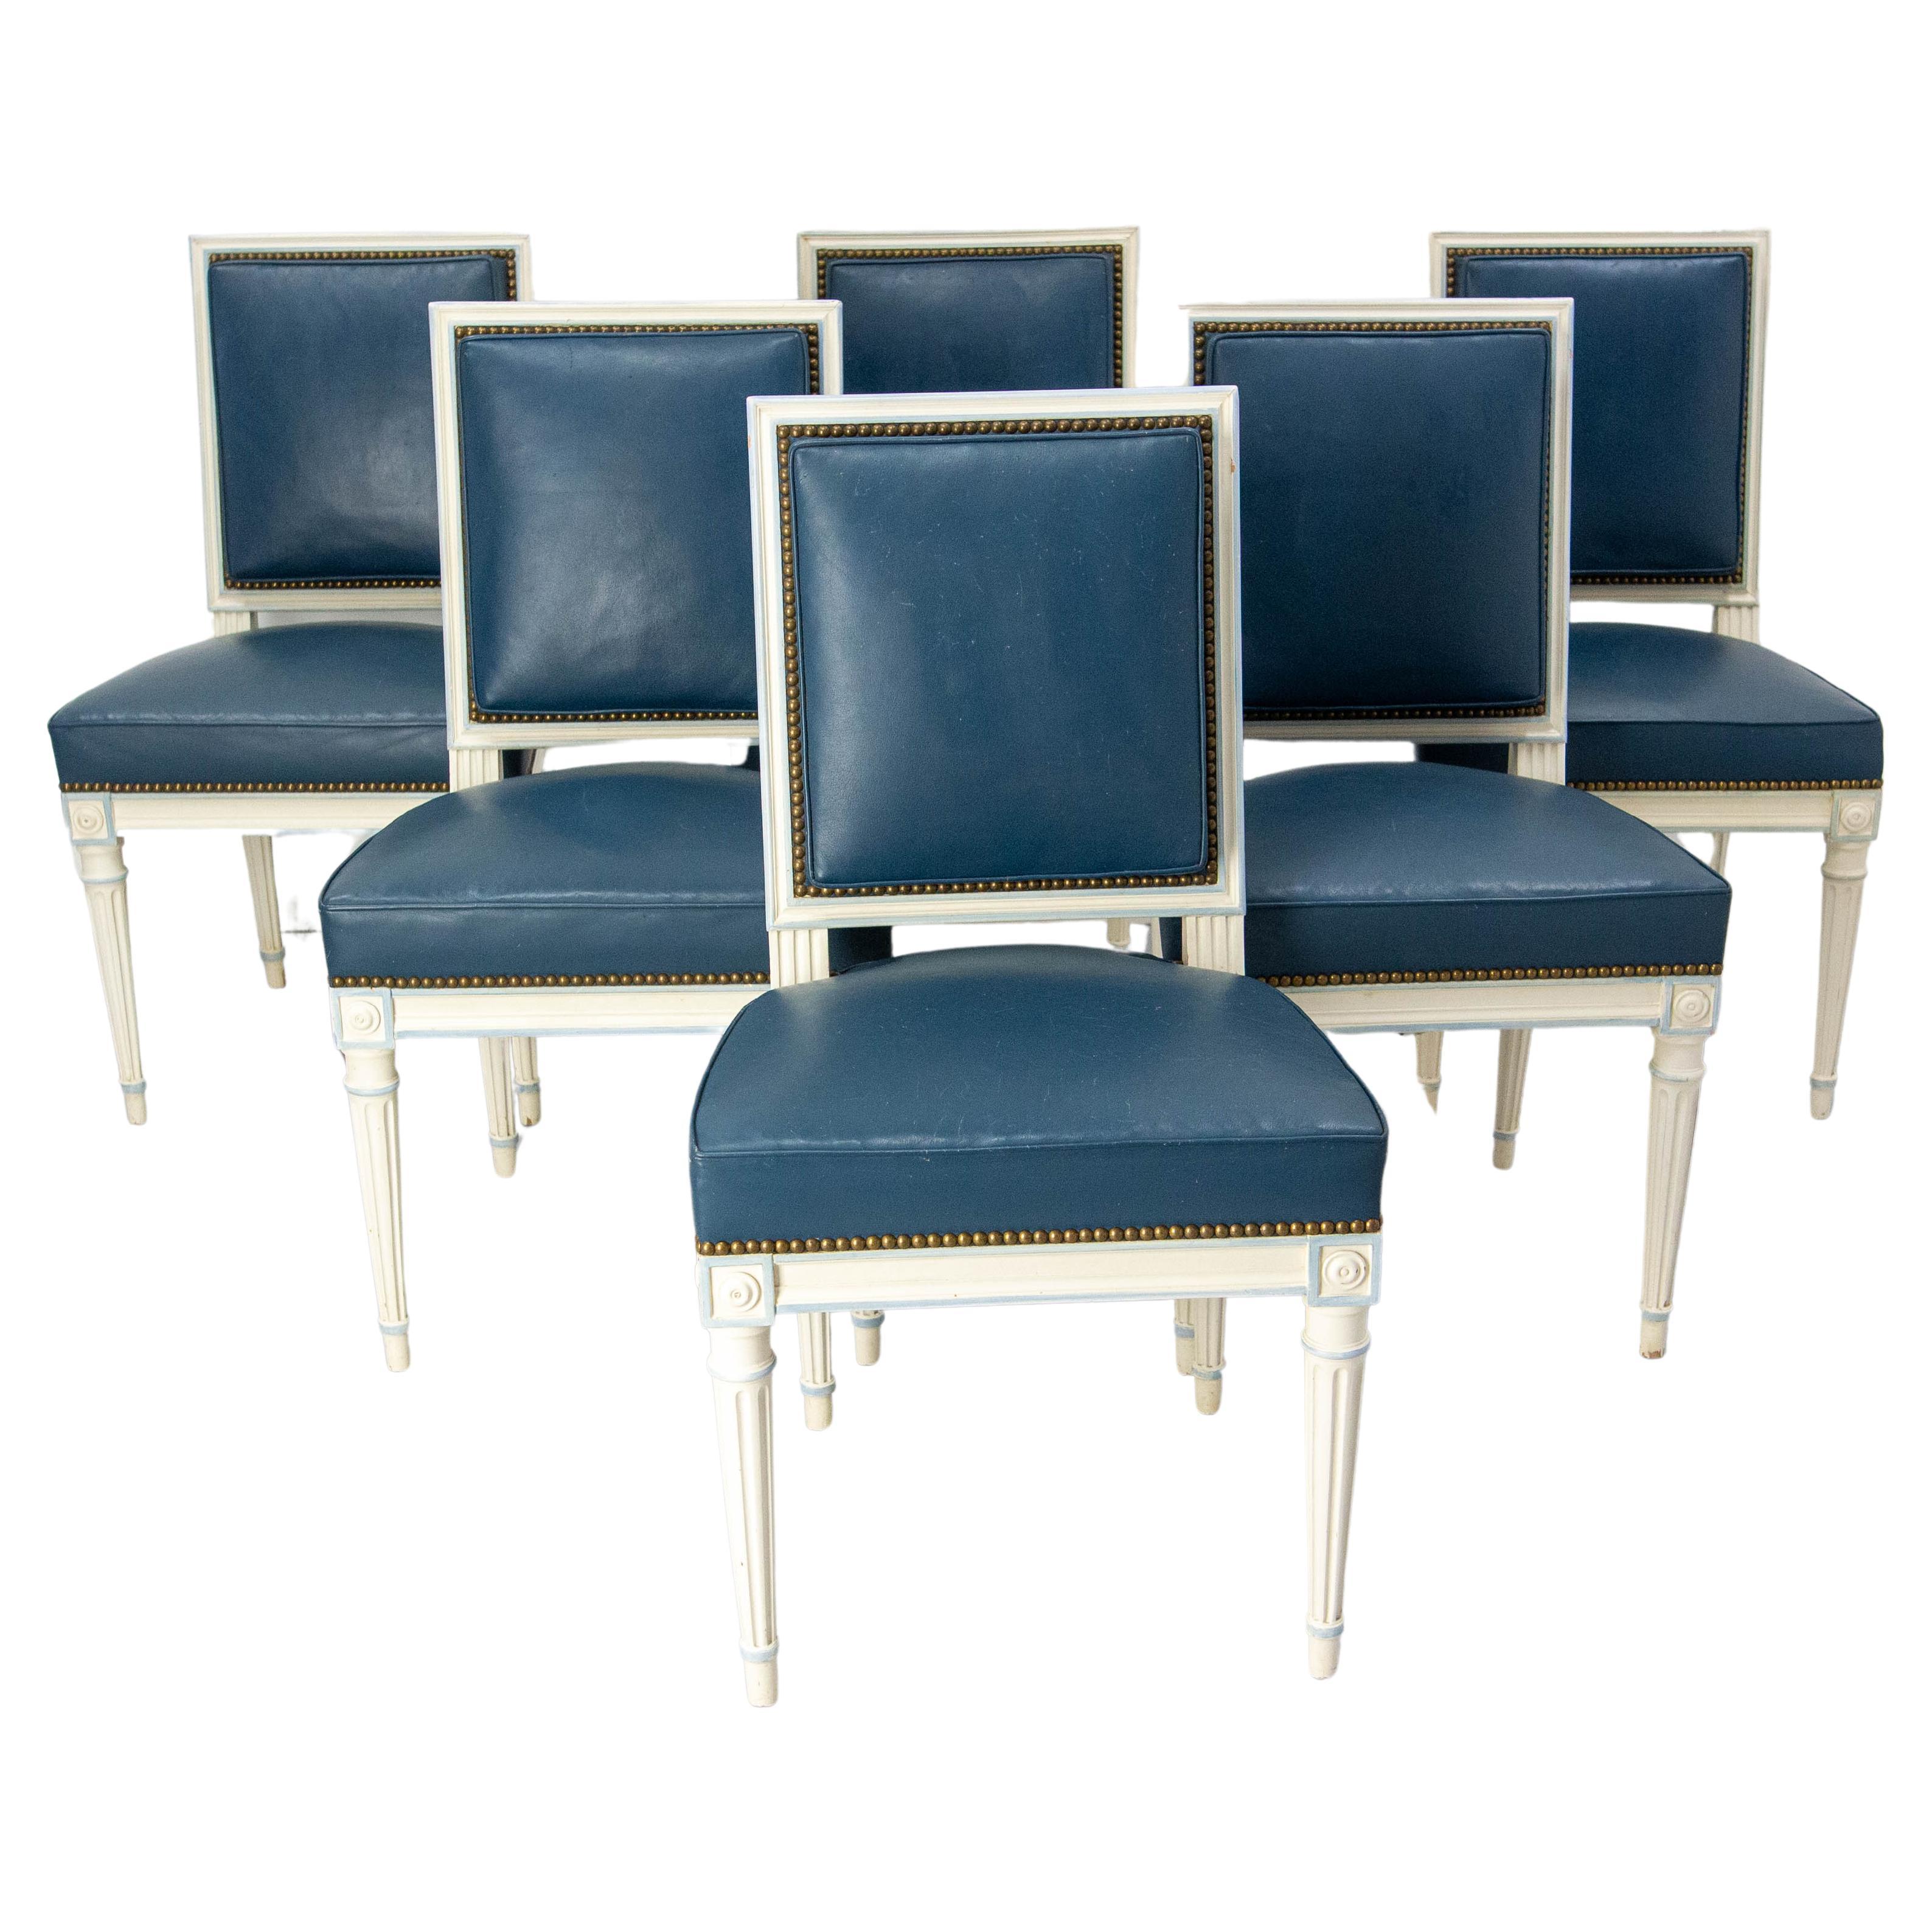 Six Dining Chairs Painted Wood & Blue Skai Louis 16 Style, Midcentury French For Sale